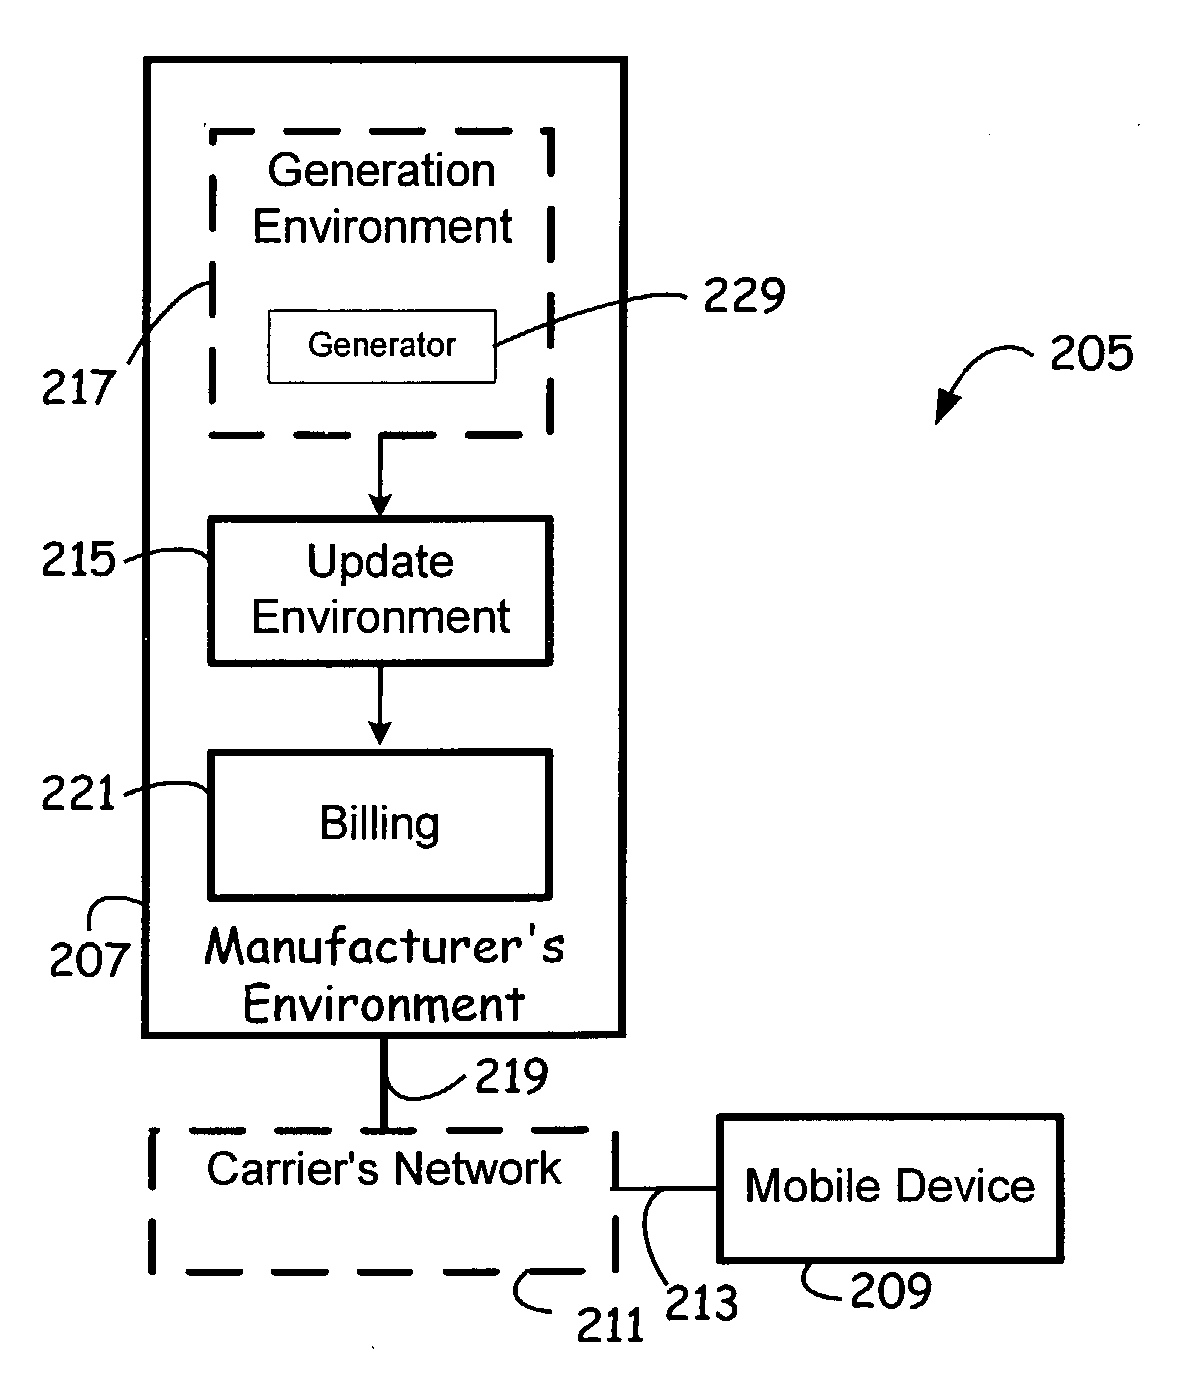 Update package generation and distribution network